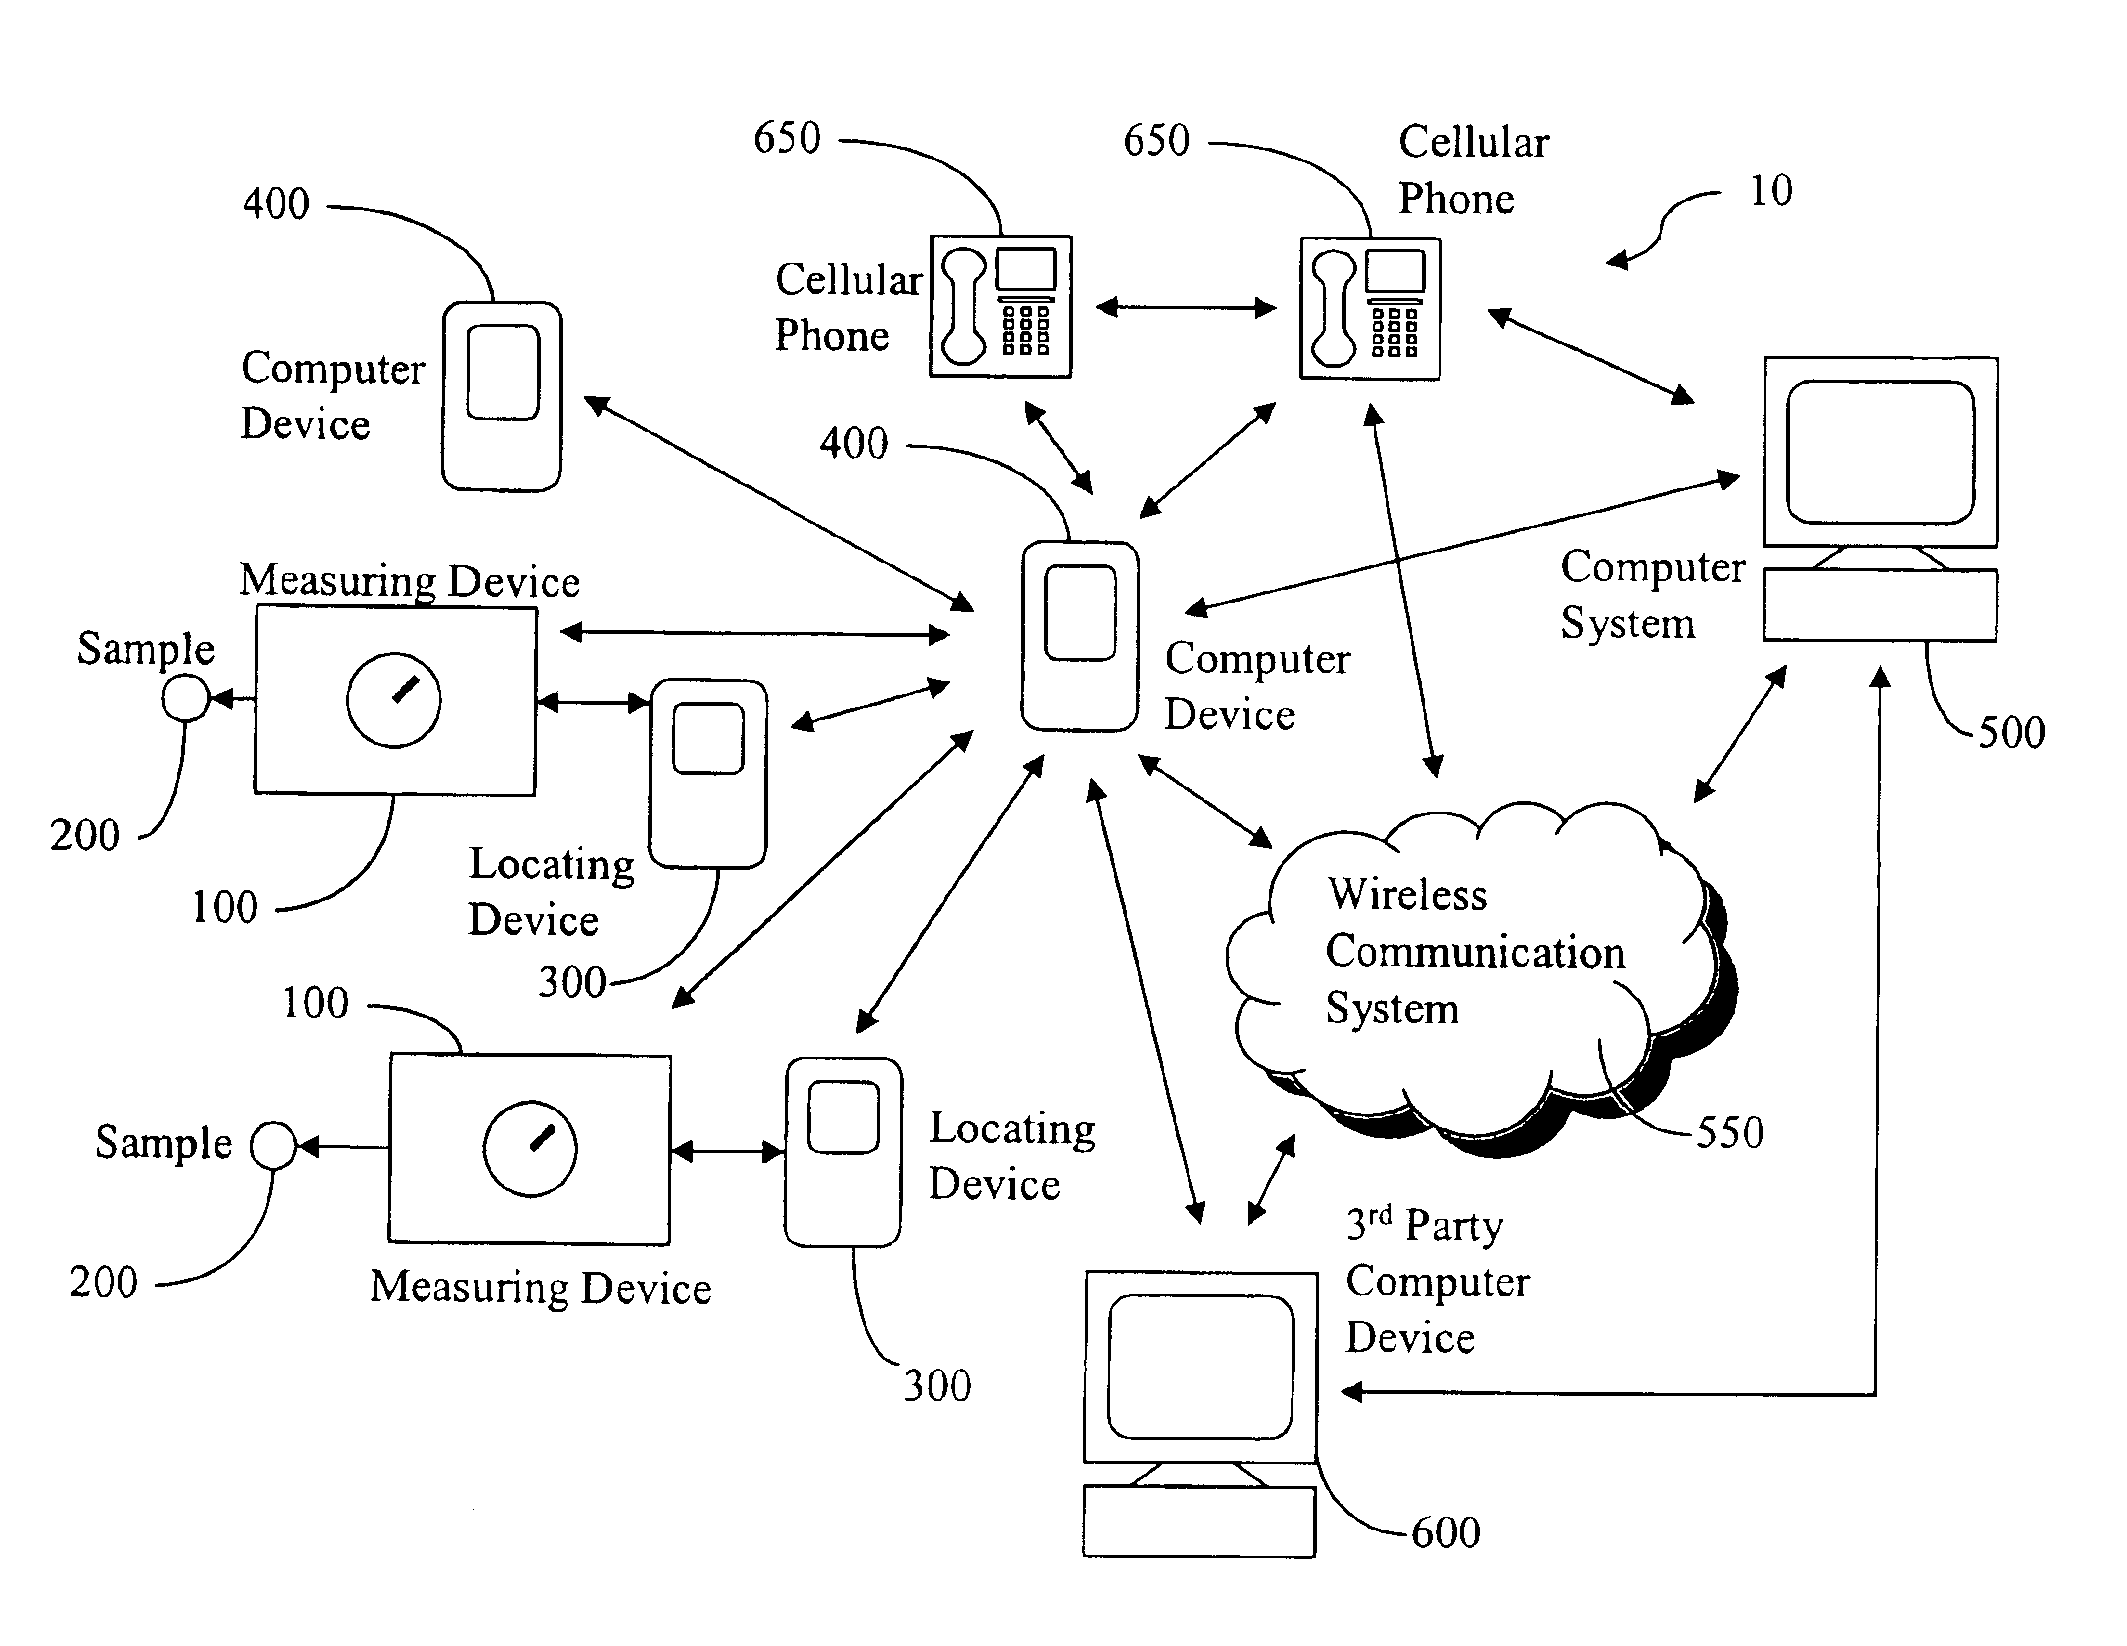 Measurement device incorporating a locating device and a portable handheld computer device and associated apparatus, system and method